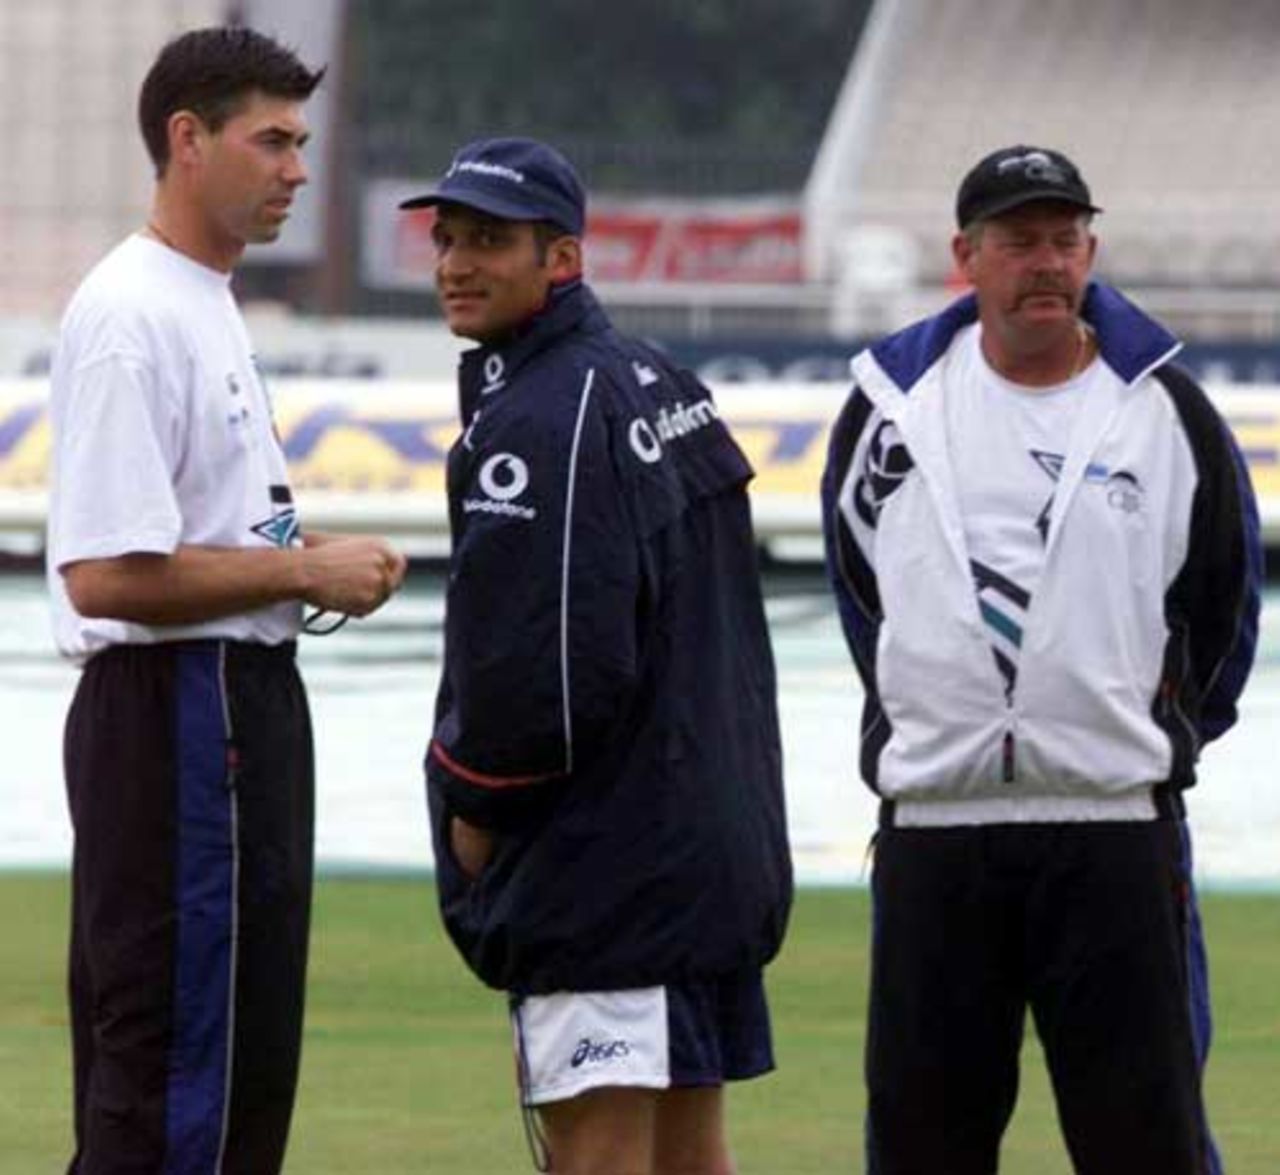 Stephen Fleming, Mark Butcher and Steve Rixon chat during a rain delay, England v New Zealand, 3rd Test, Old Trafford, 1999